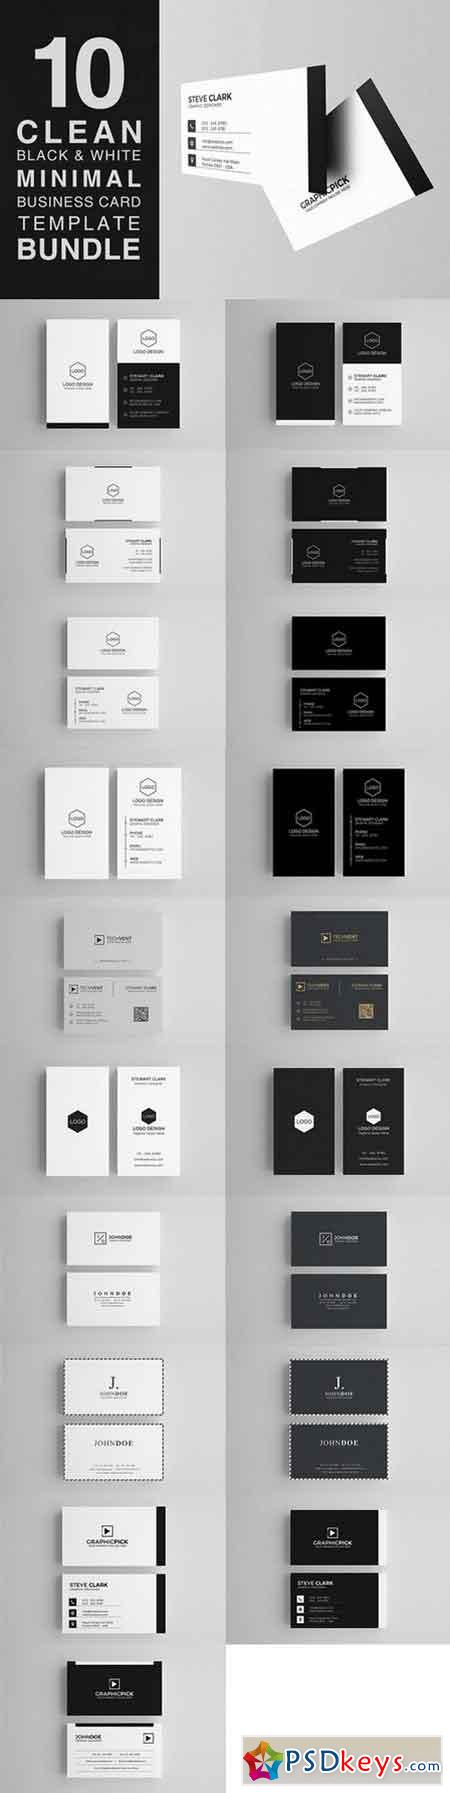 10 Clean Minimal Business Cards 720418